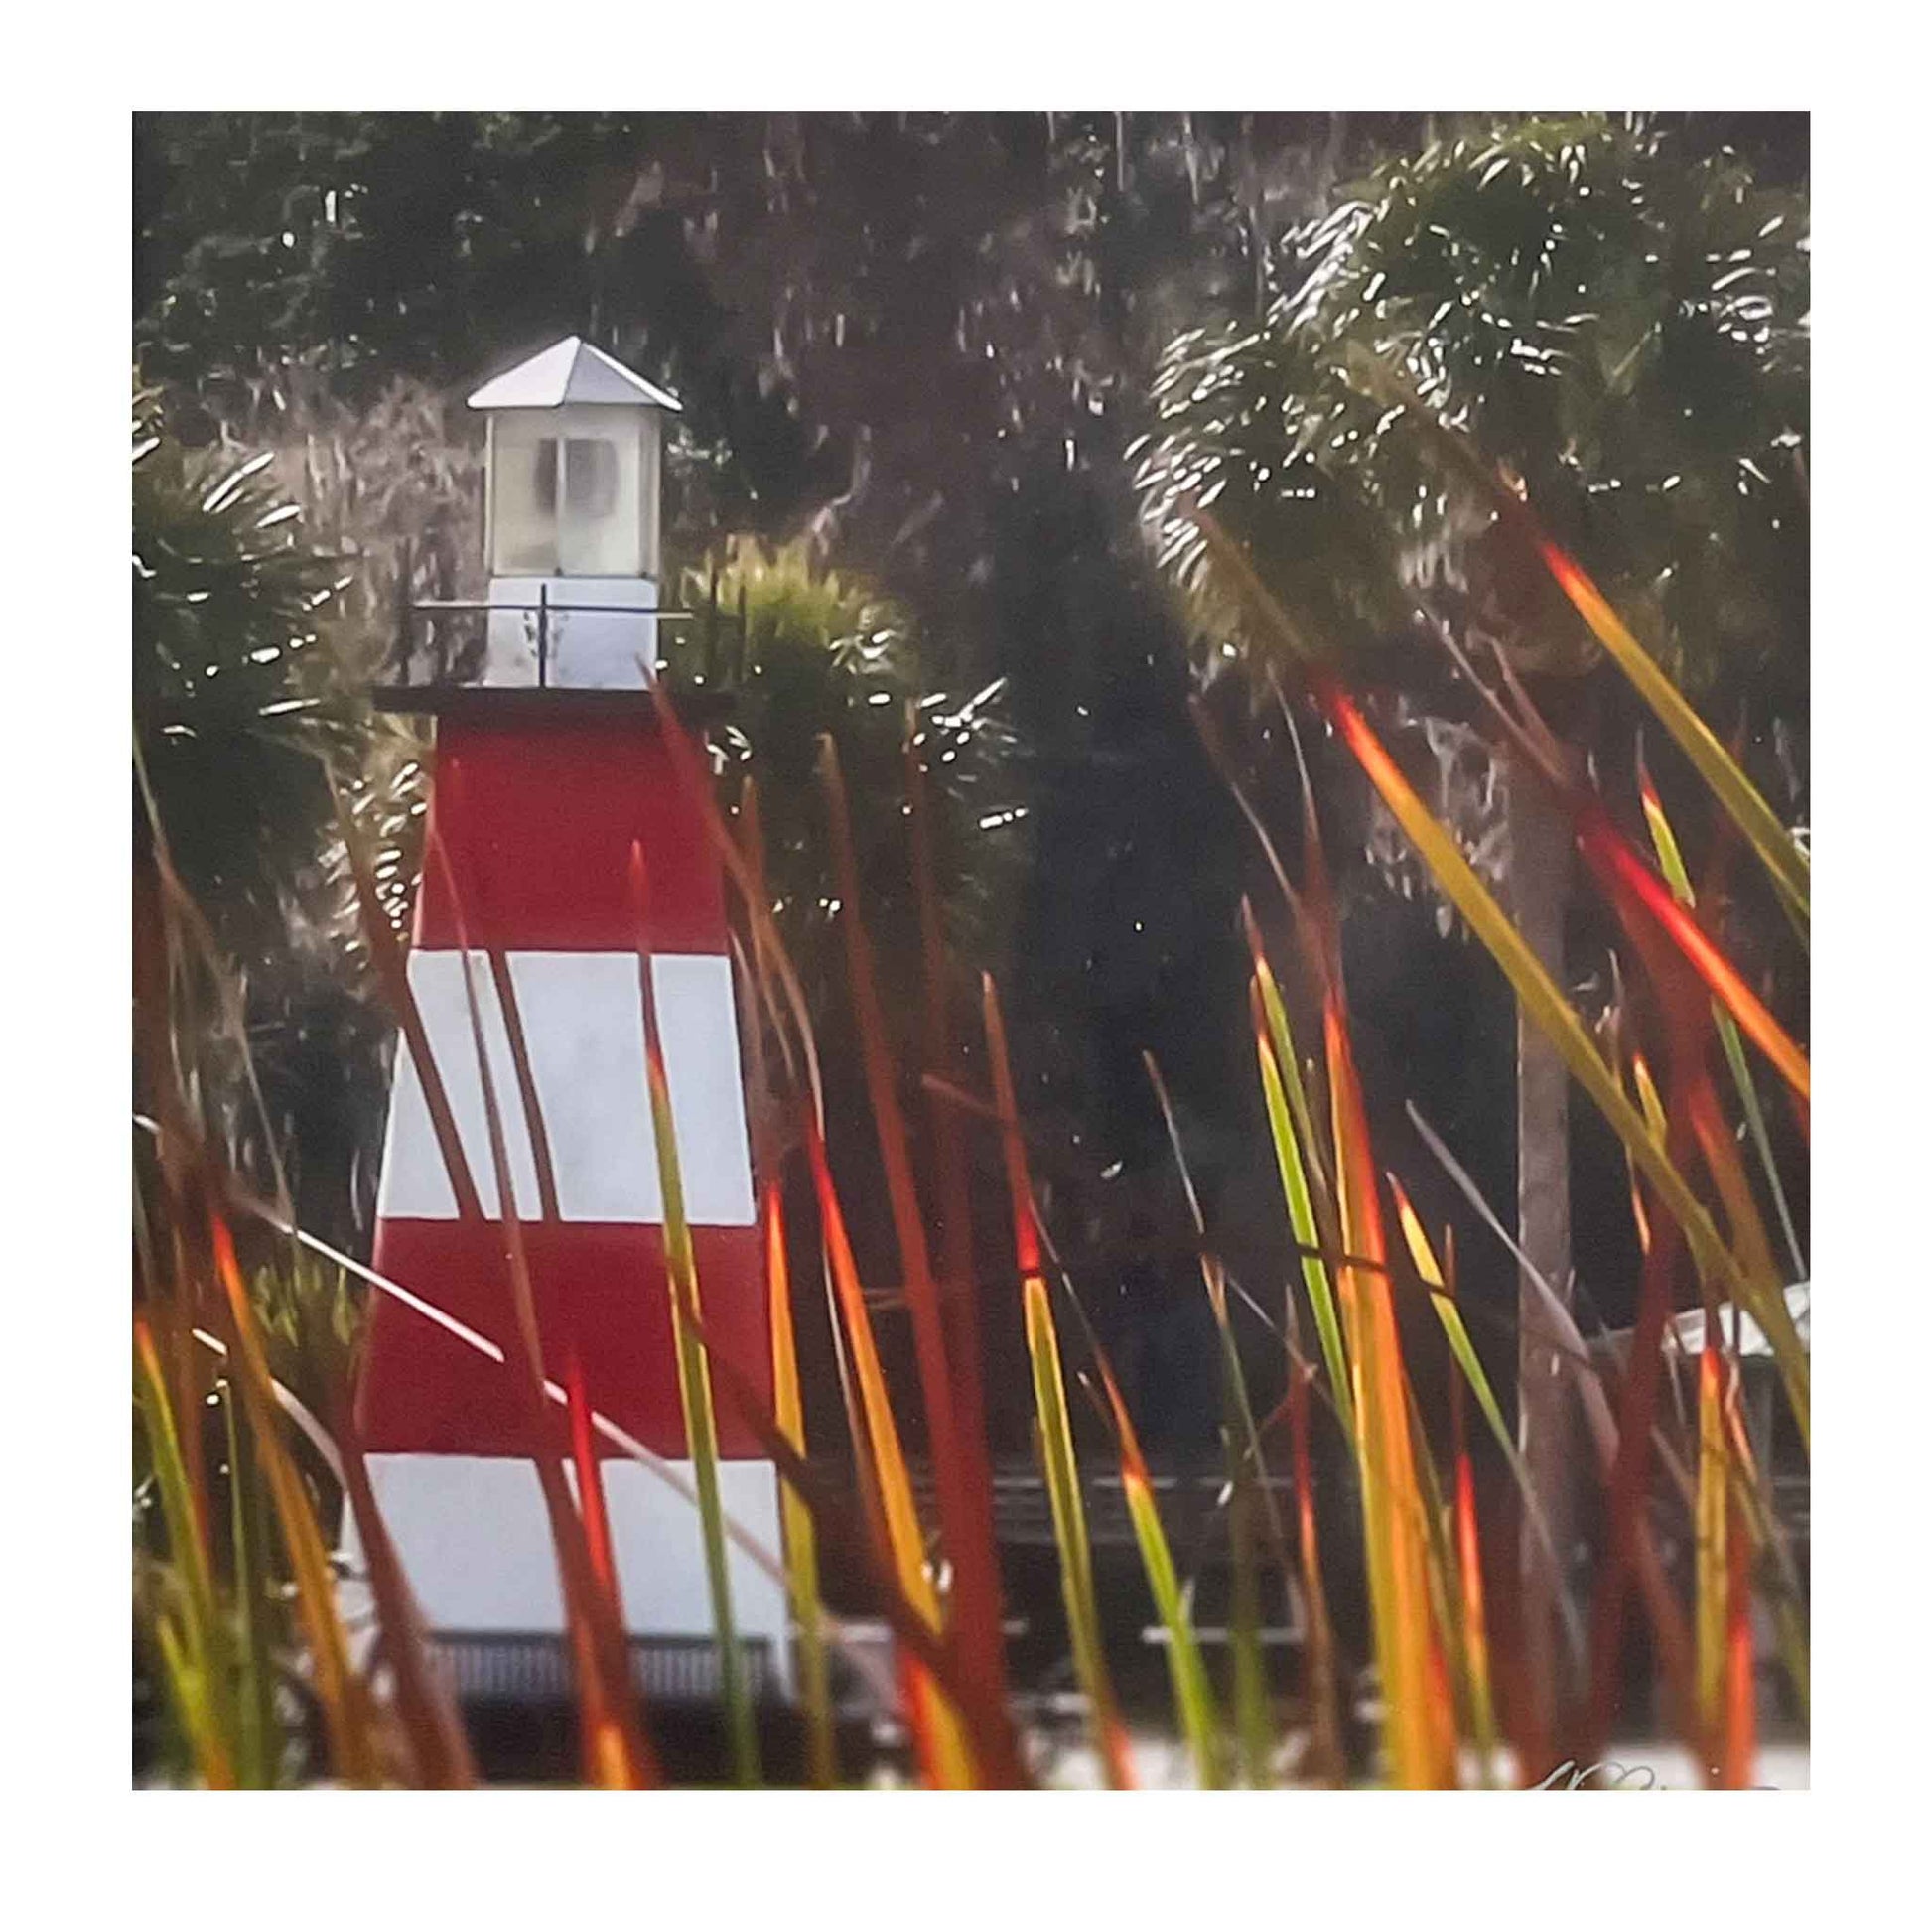 Mount Dora Light House, Dora Lake, Mount Dora, storm clouds, Print, archival photo paper, Luster Finish, mounted on sturdy mat board, framed with glass, Matted without glass, 5" X 7", 8" X 10", 11" X 14", Charles Dean Carpino